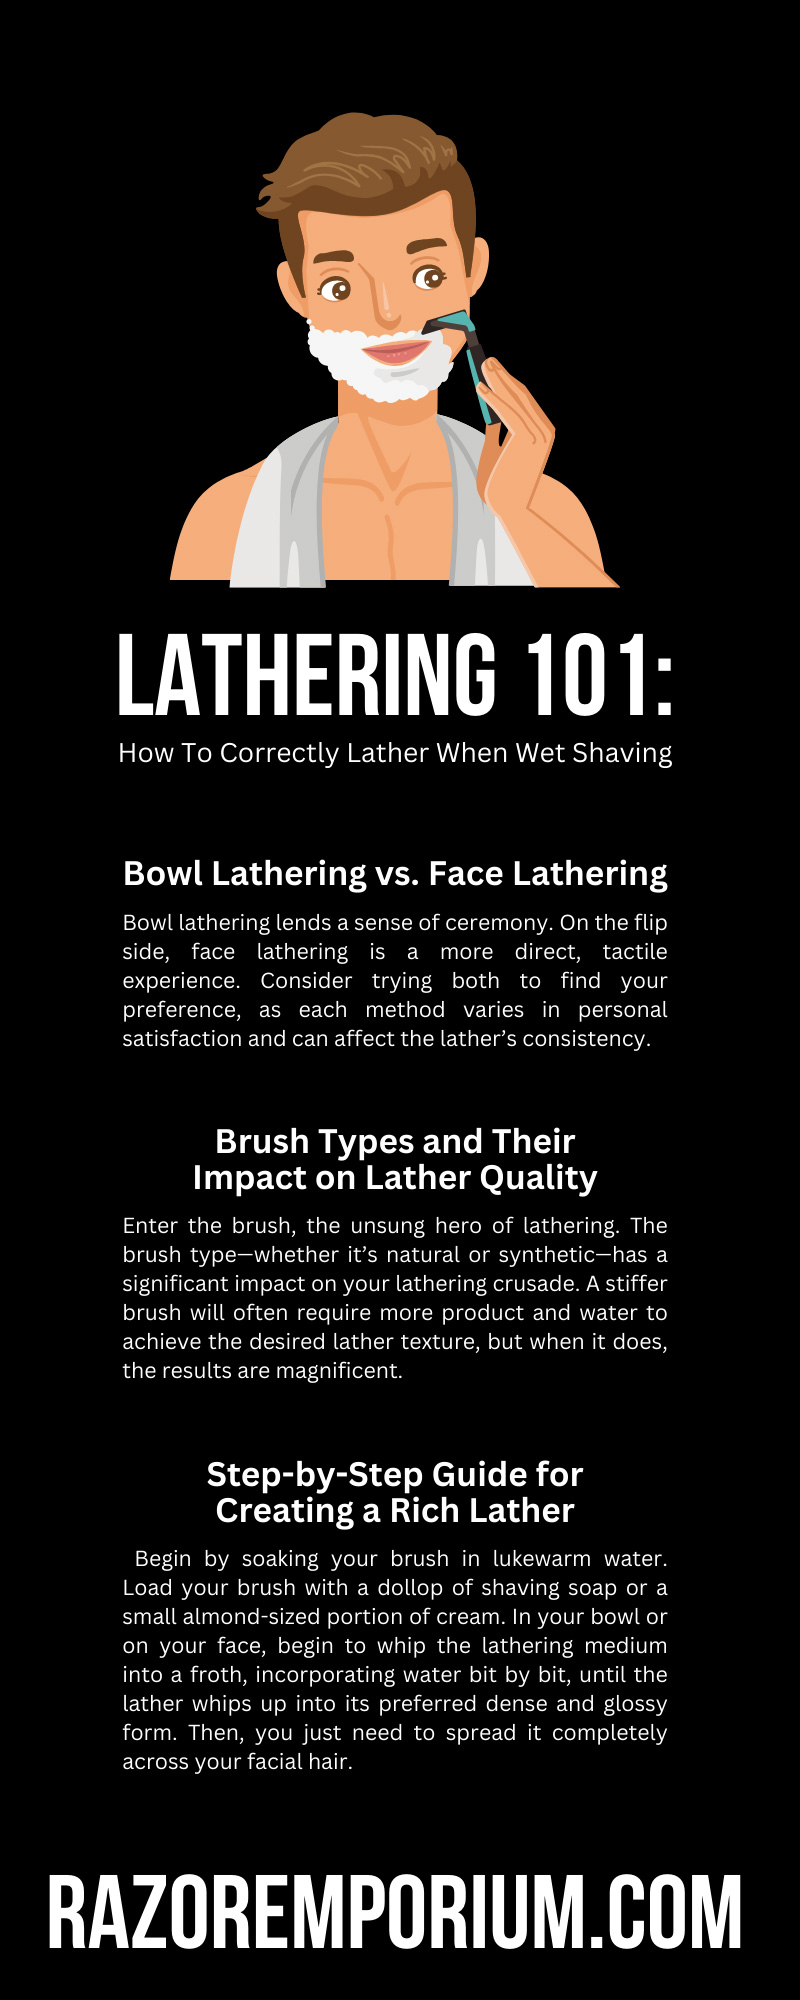 Lathering 101: How To Correctly Lather When Wet Shaving